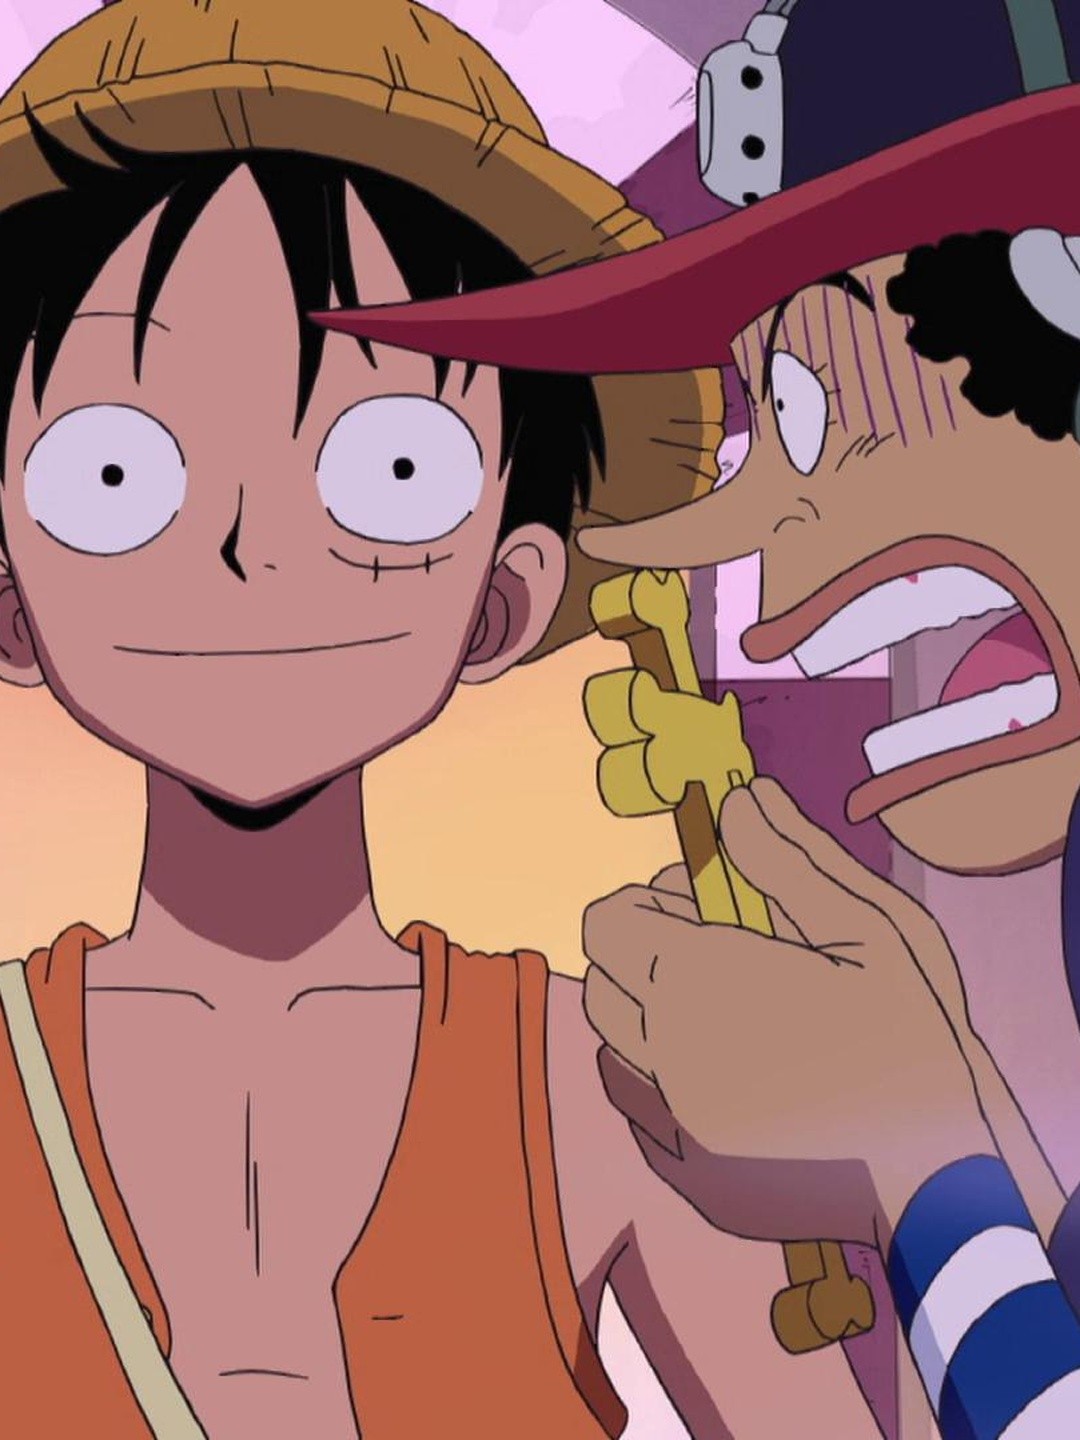 When Luffy argued with Usopp & - Monkey D. Luffy X Nami